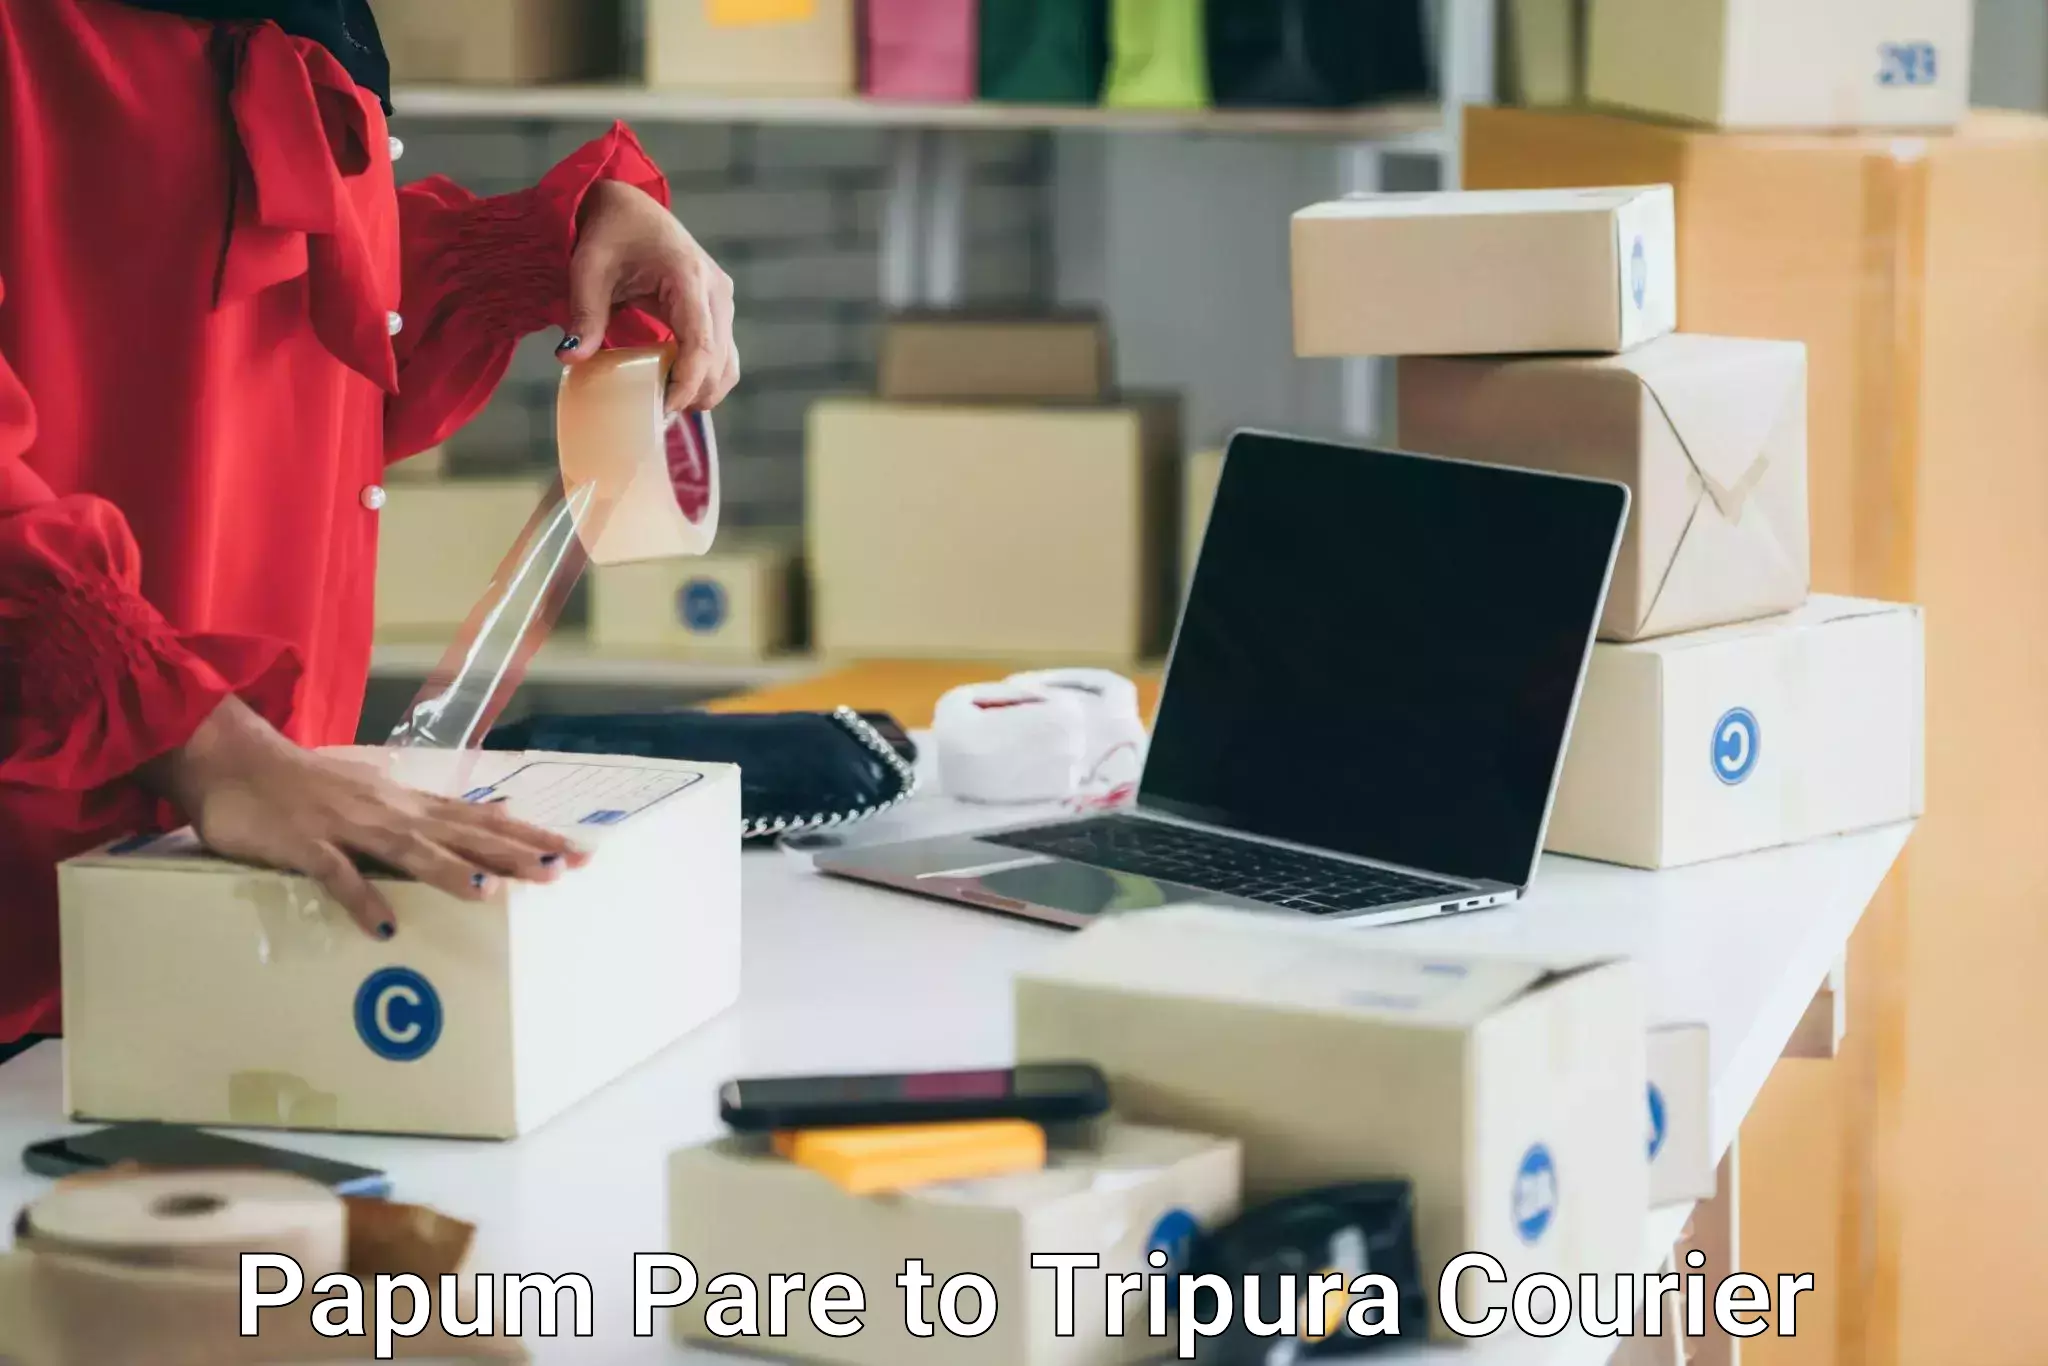 Trusted relocation experts Papum Pare to Tripura